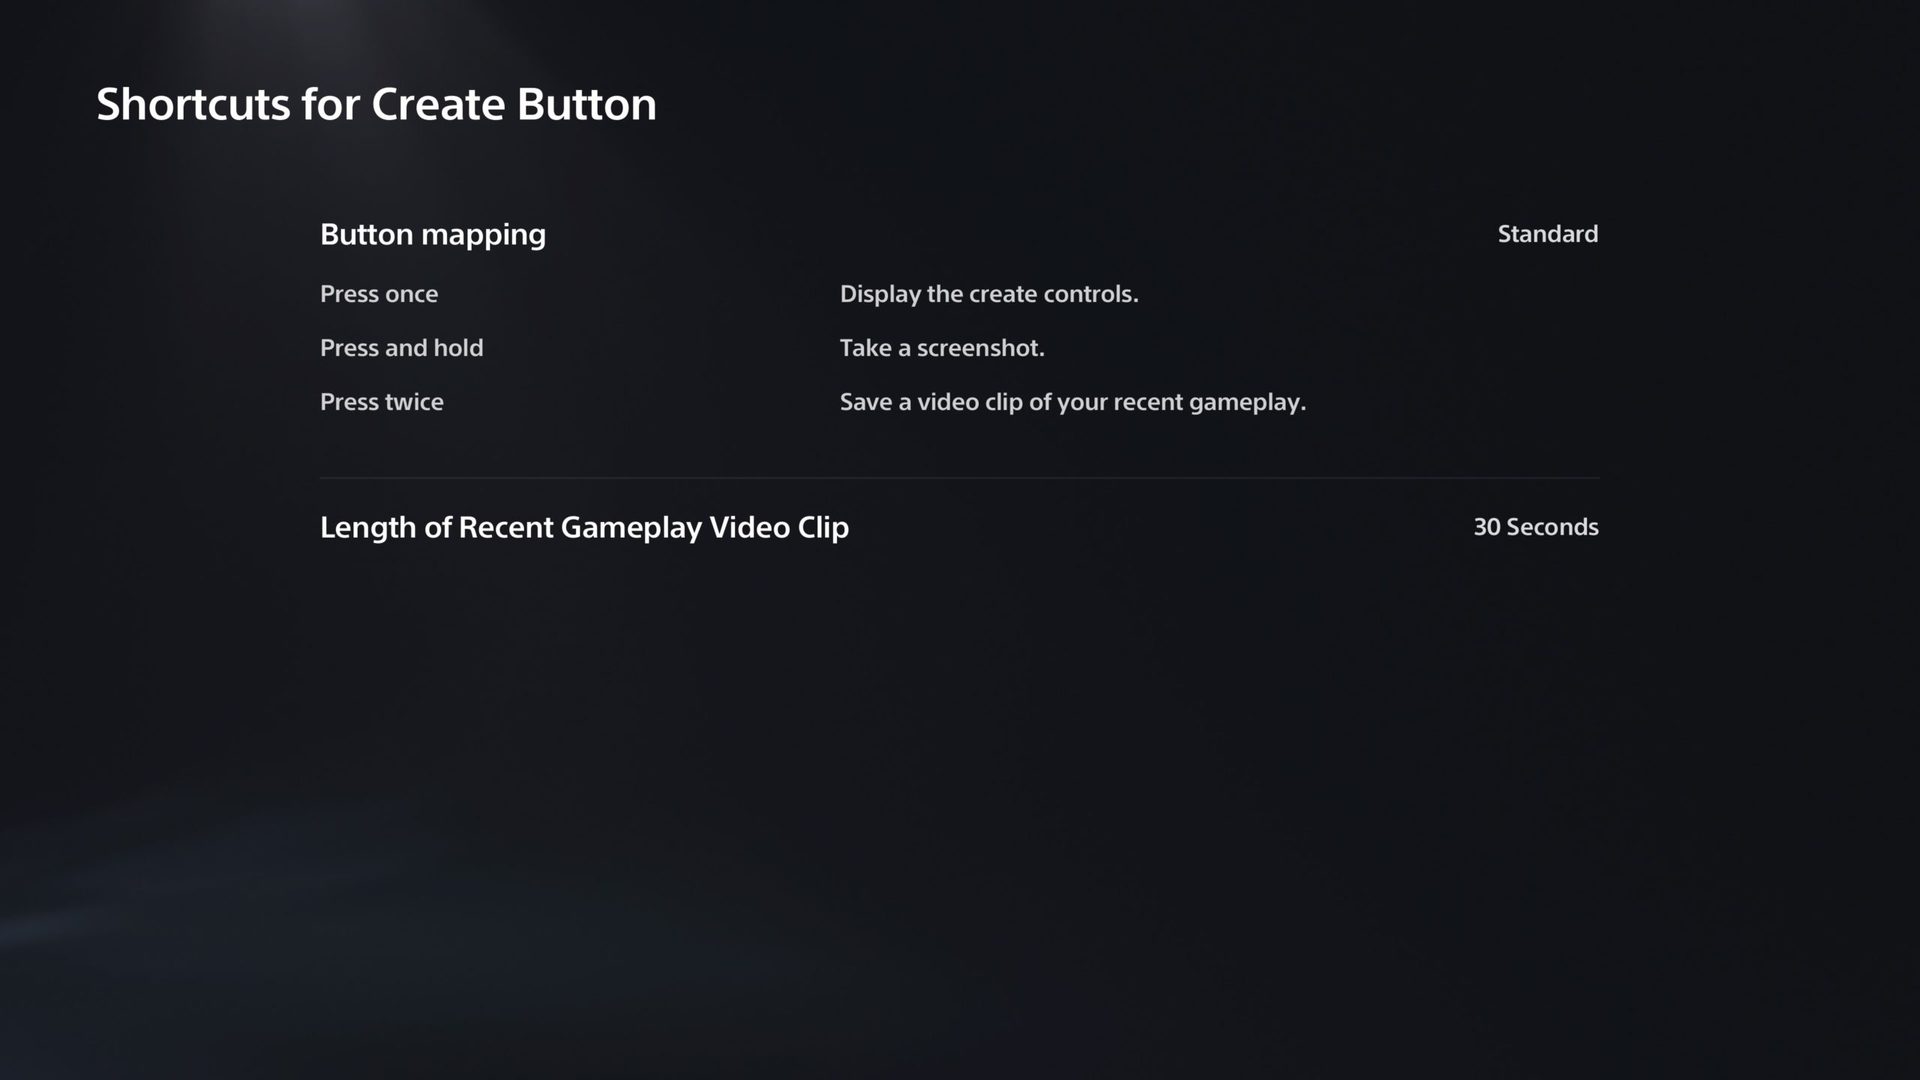 Shortcuts to create a playstation 5 button